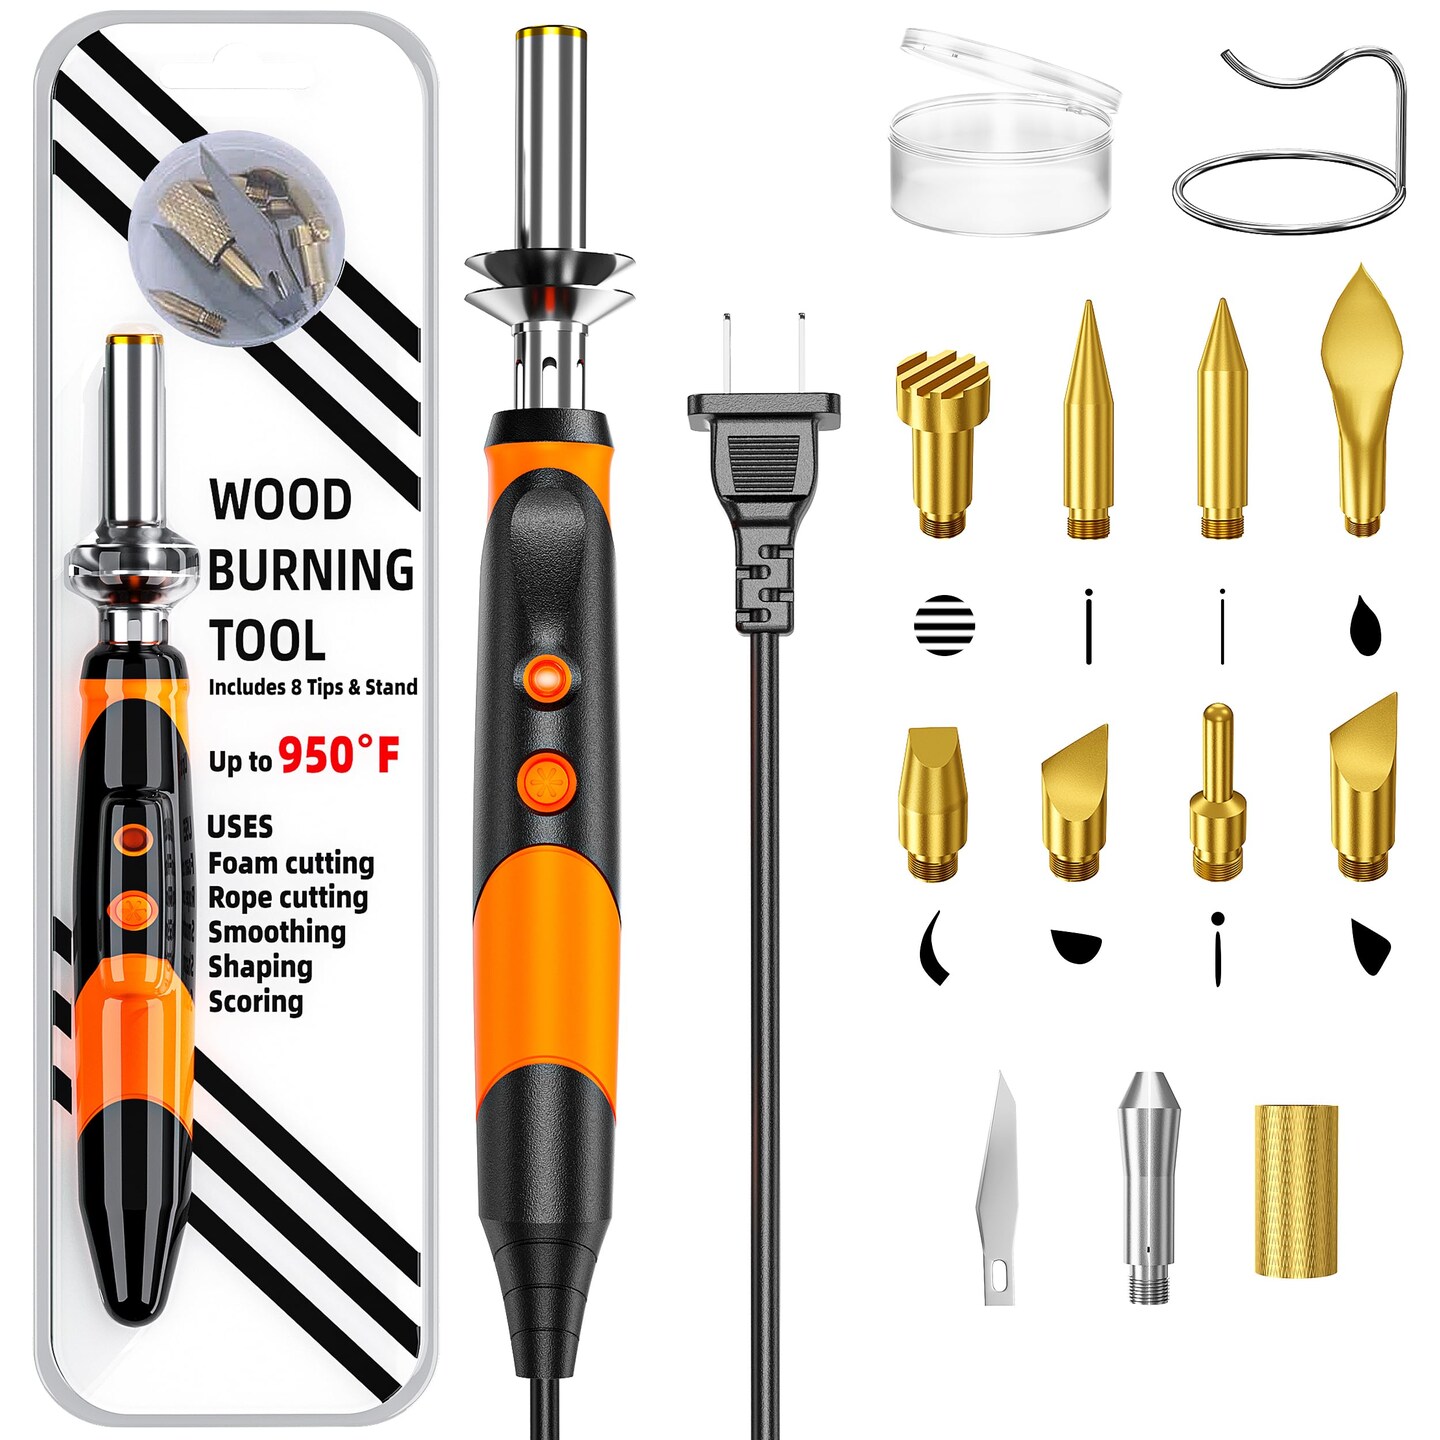 Wood Burning kit, Professional WoodBurning Pen Tool, DIY Creative Tools,Wood Burner for Embossing/Carving/Pyrography&#xFF0C;Suitable for Beginners,Adults (orange)